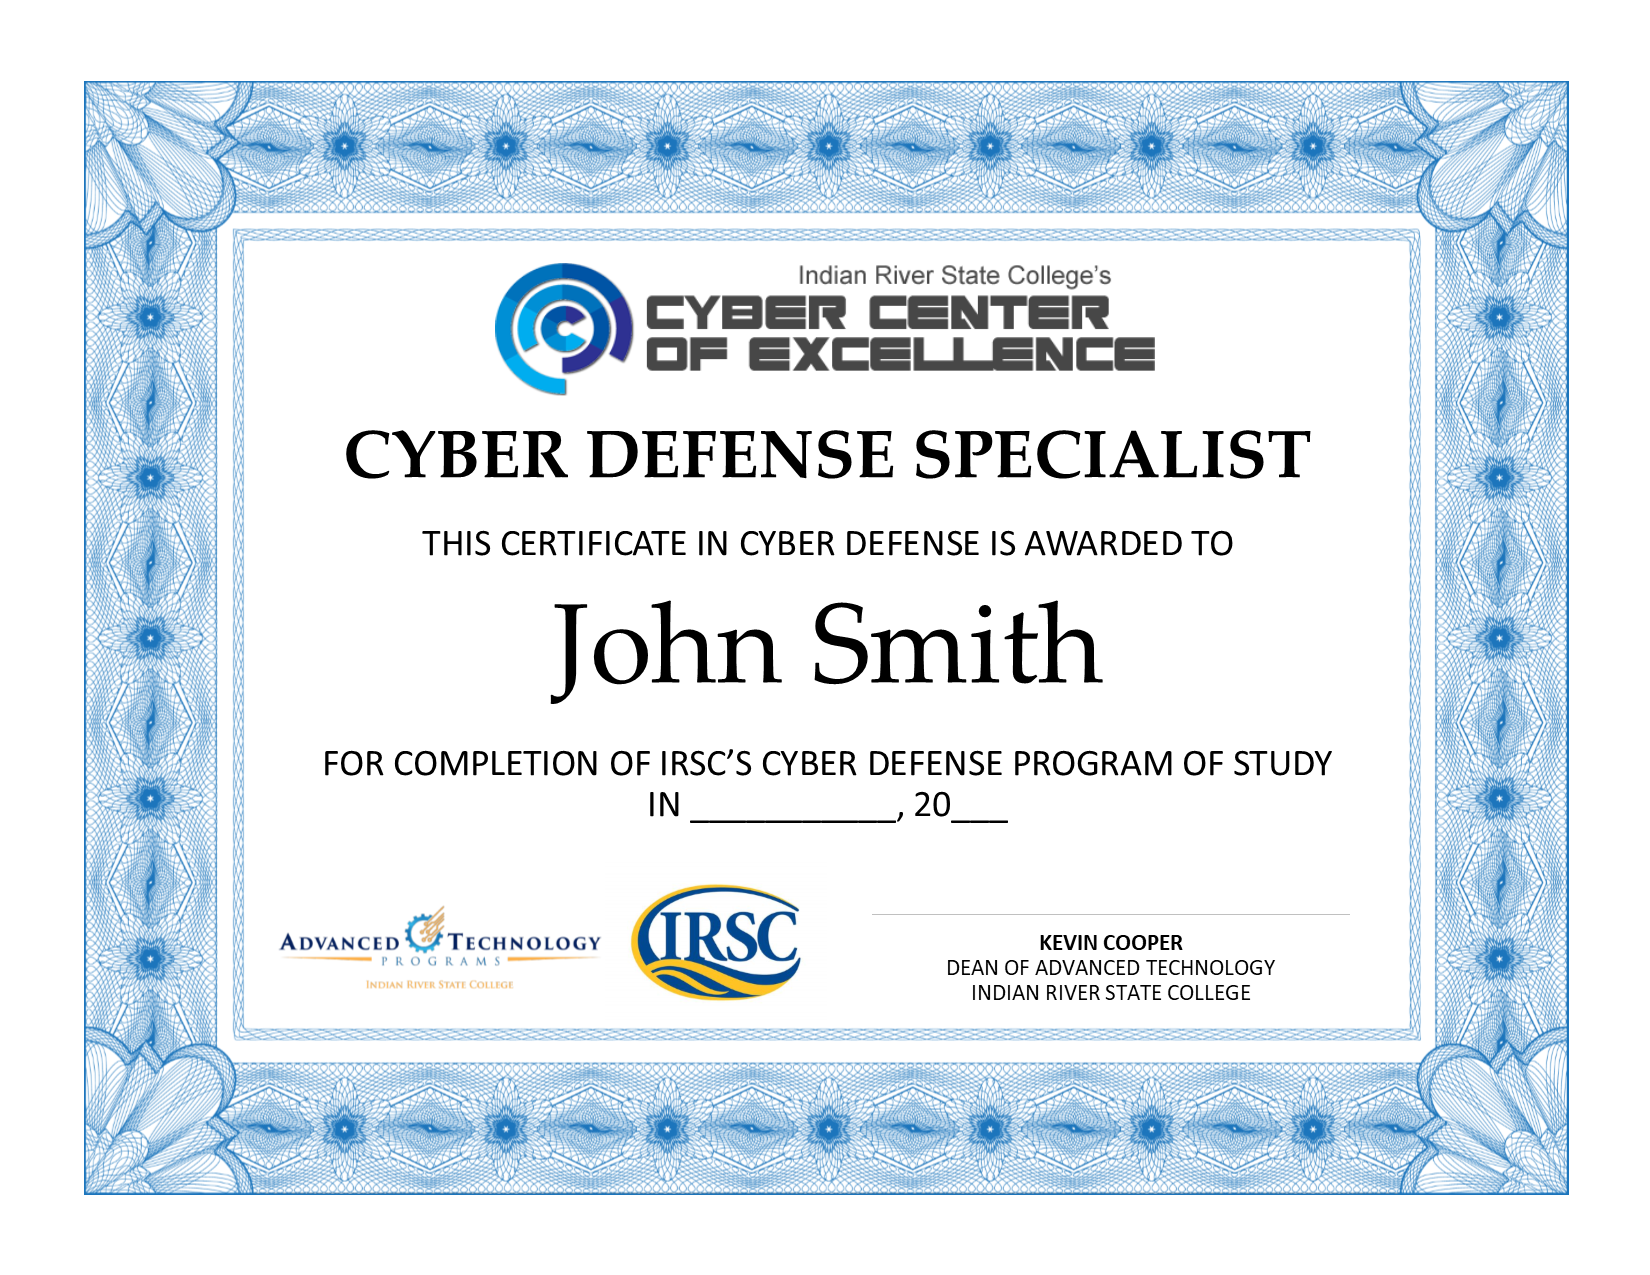 irsc-now-offering-a-cyber-defense-specialist-certificate-cyber-center-of-excellence-at-indian